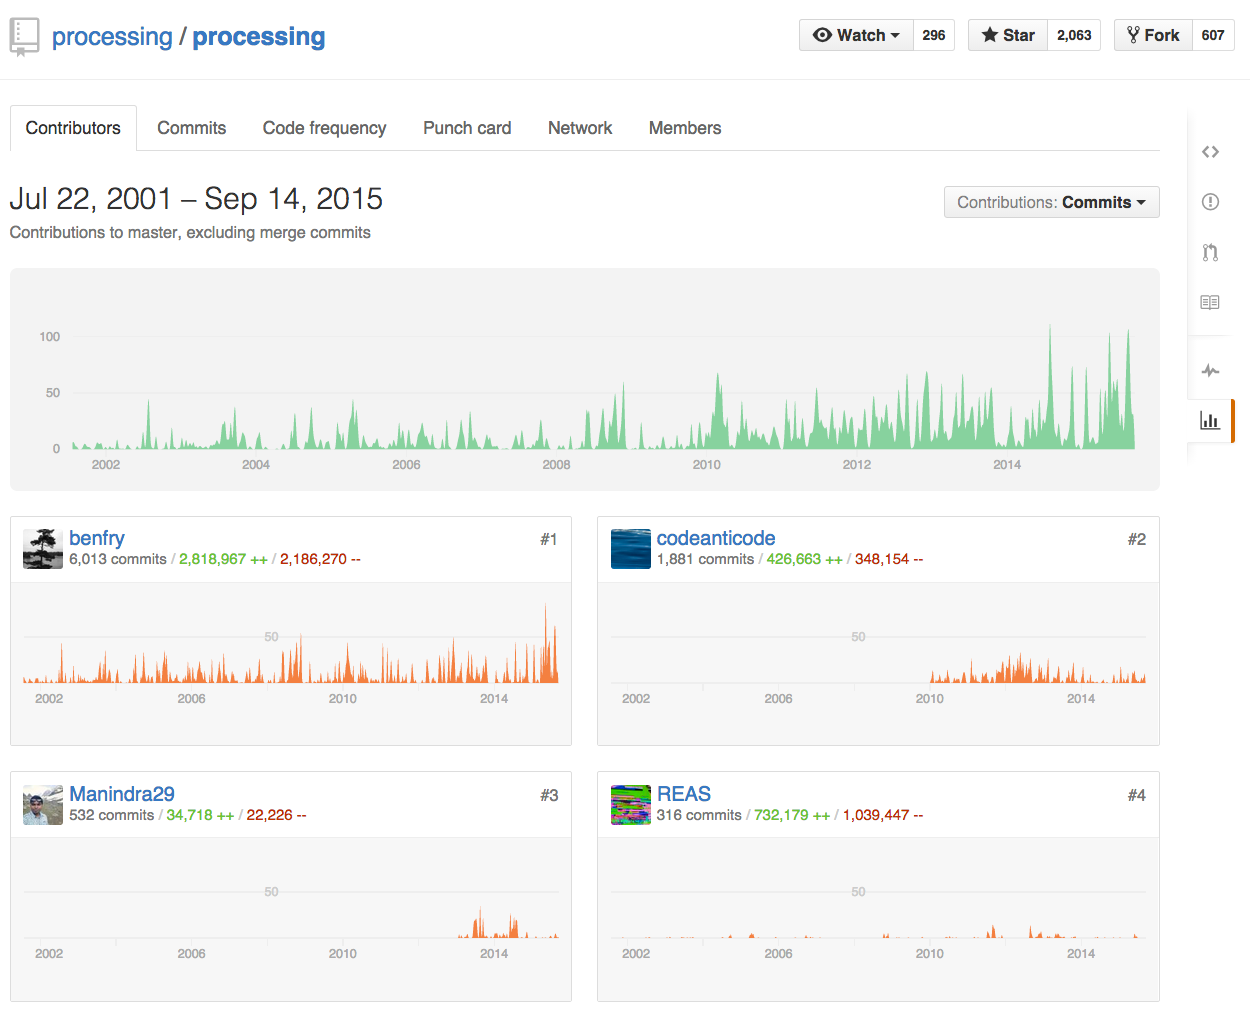 Processing Github page contributors Screenshot. Courtesy of Konstantinos Chorianopoulos. Screenshot from https://github.com/processing.